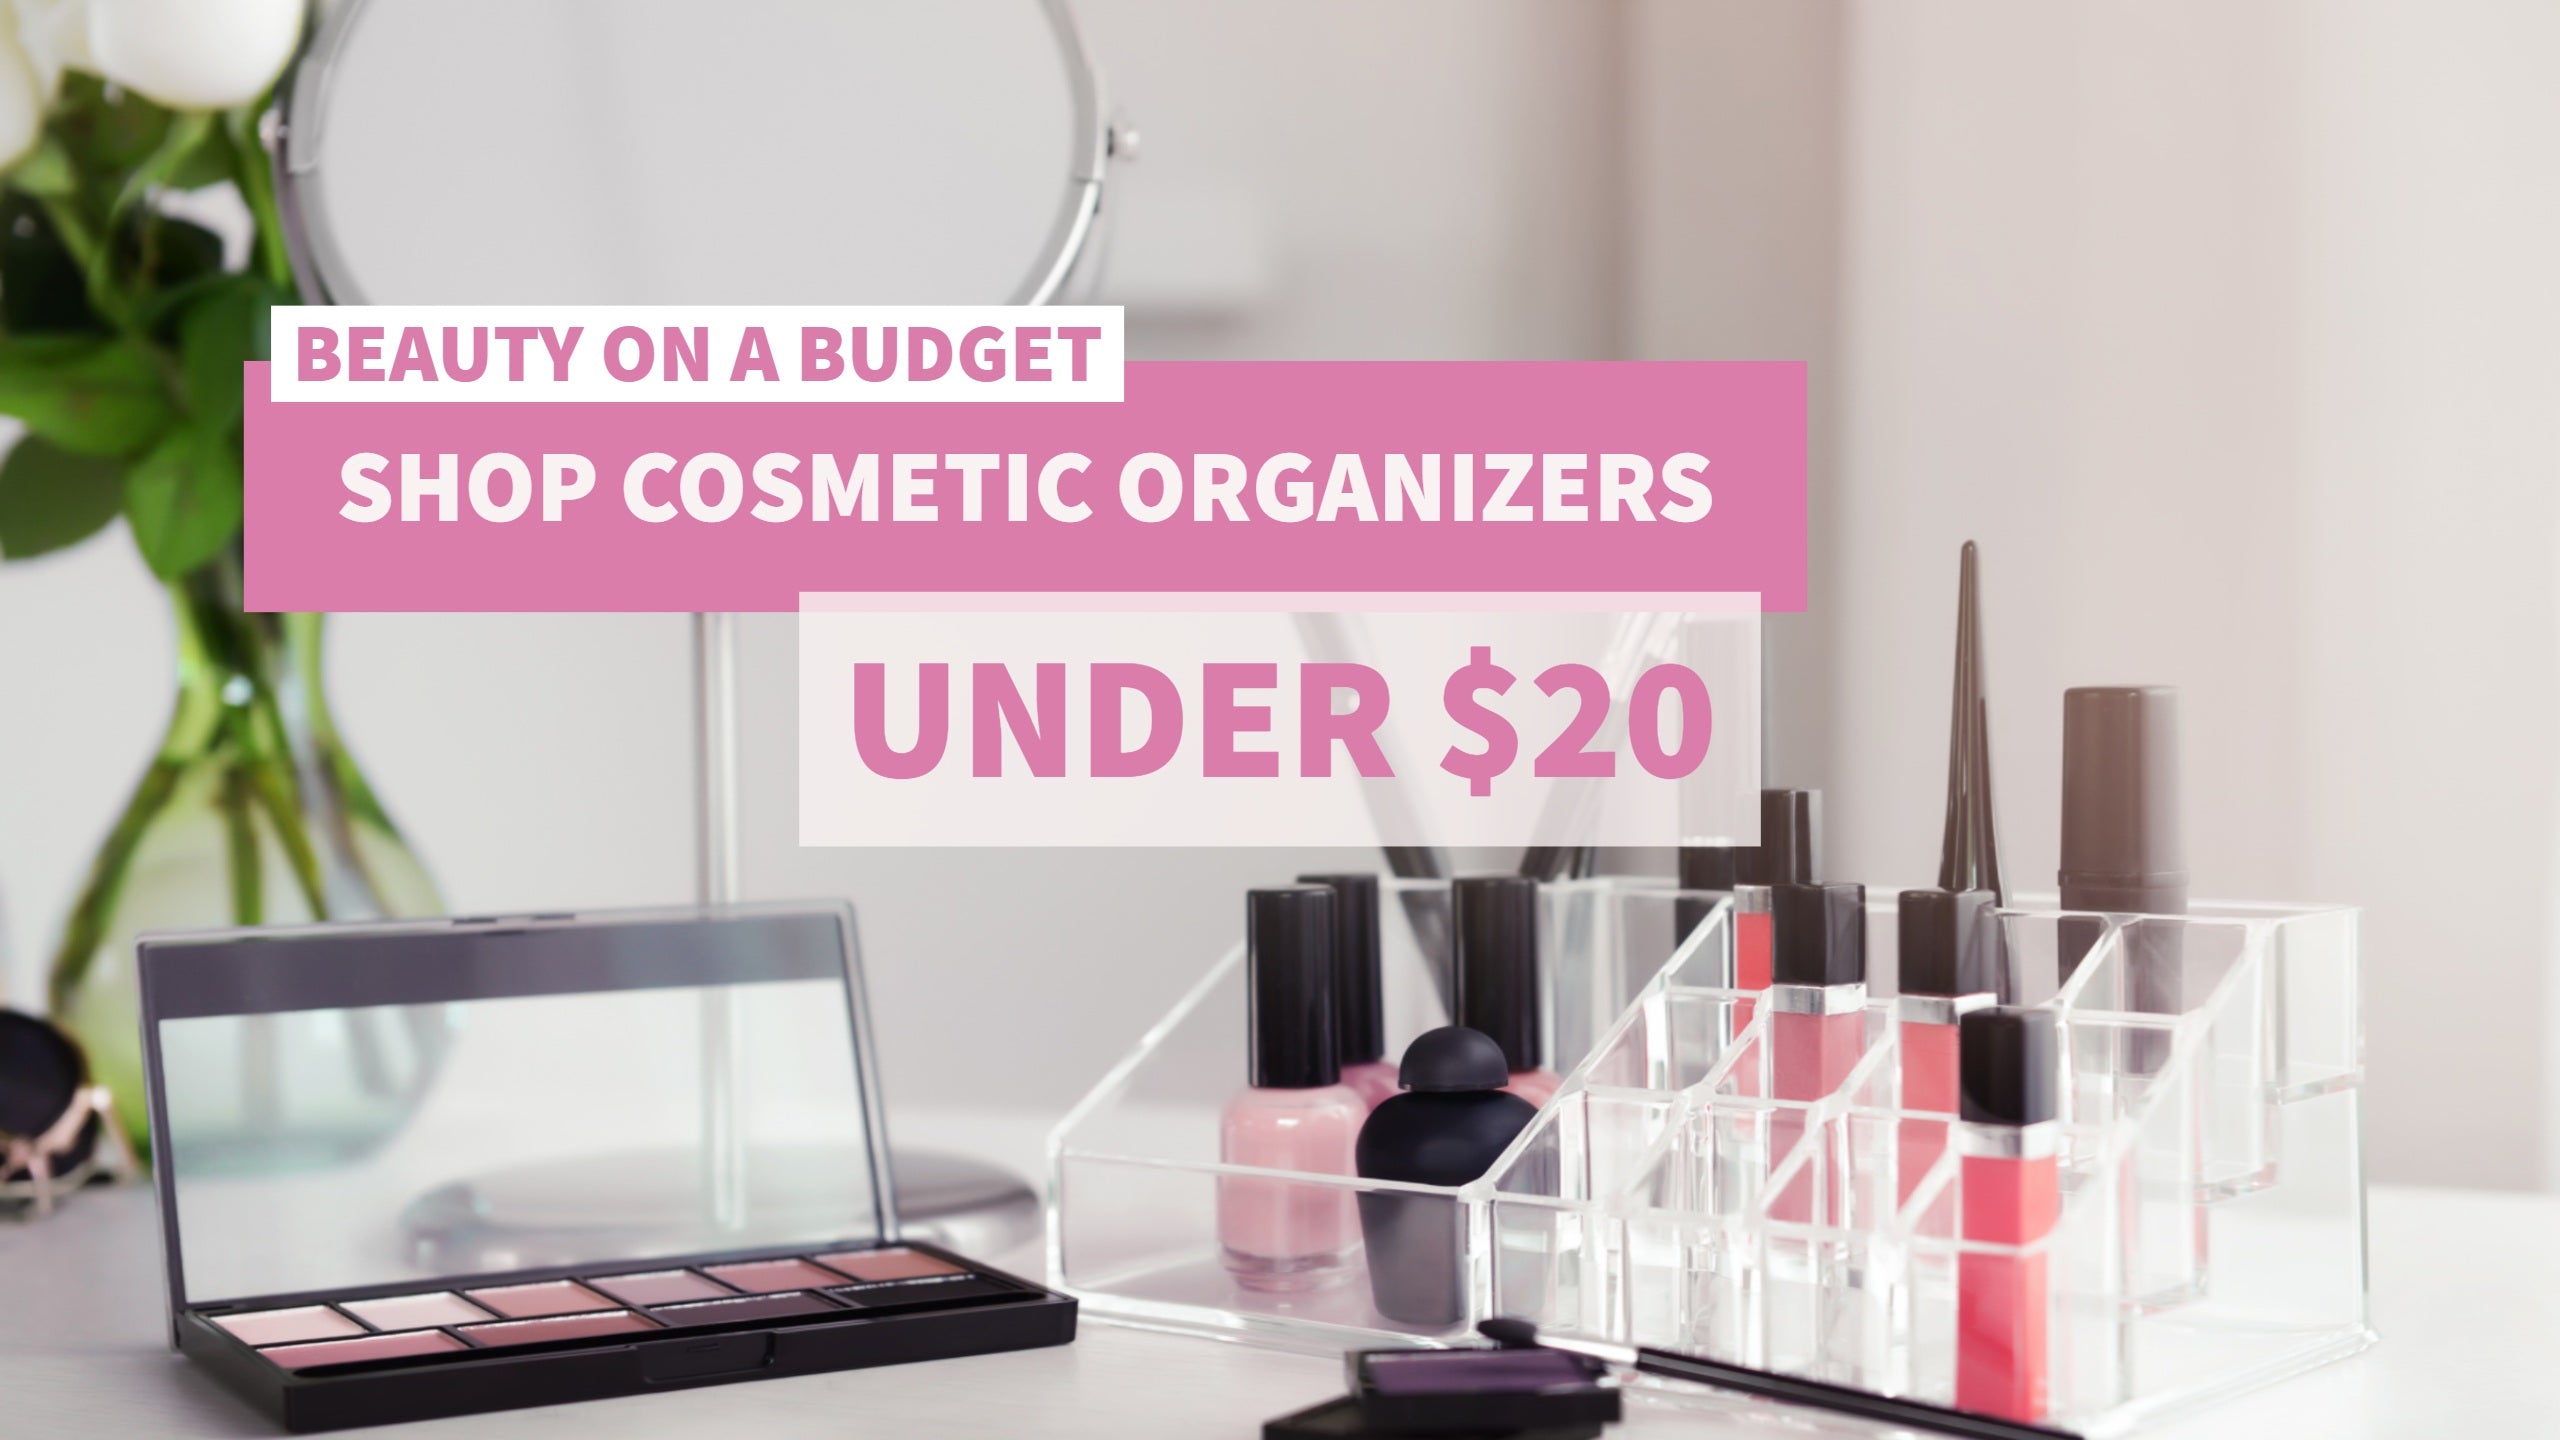 Sorbus Beauty on a Budget - Cosmetic Organizers under $20